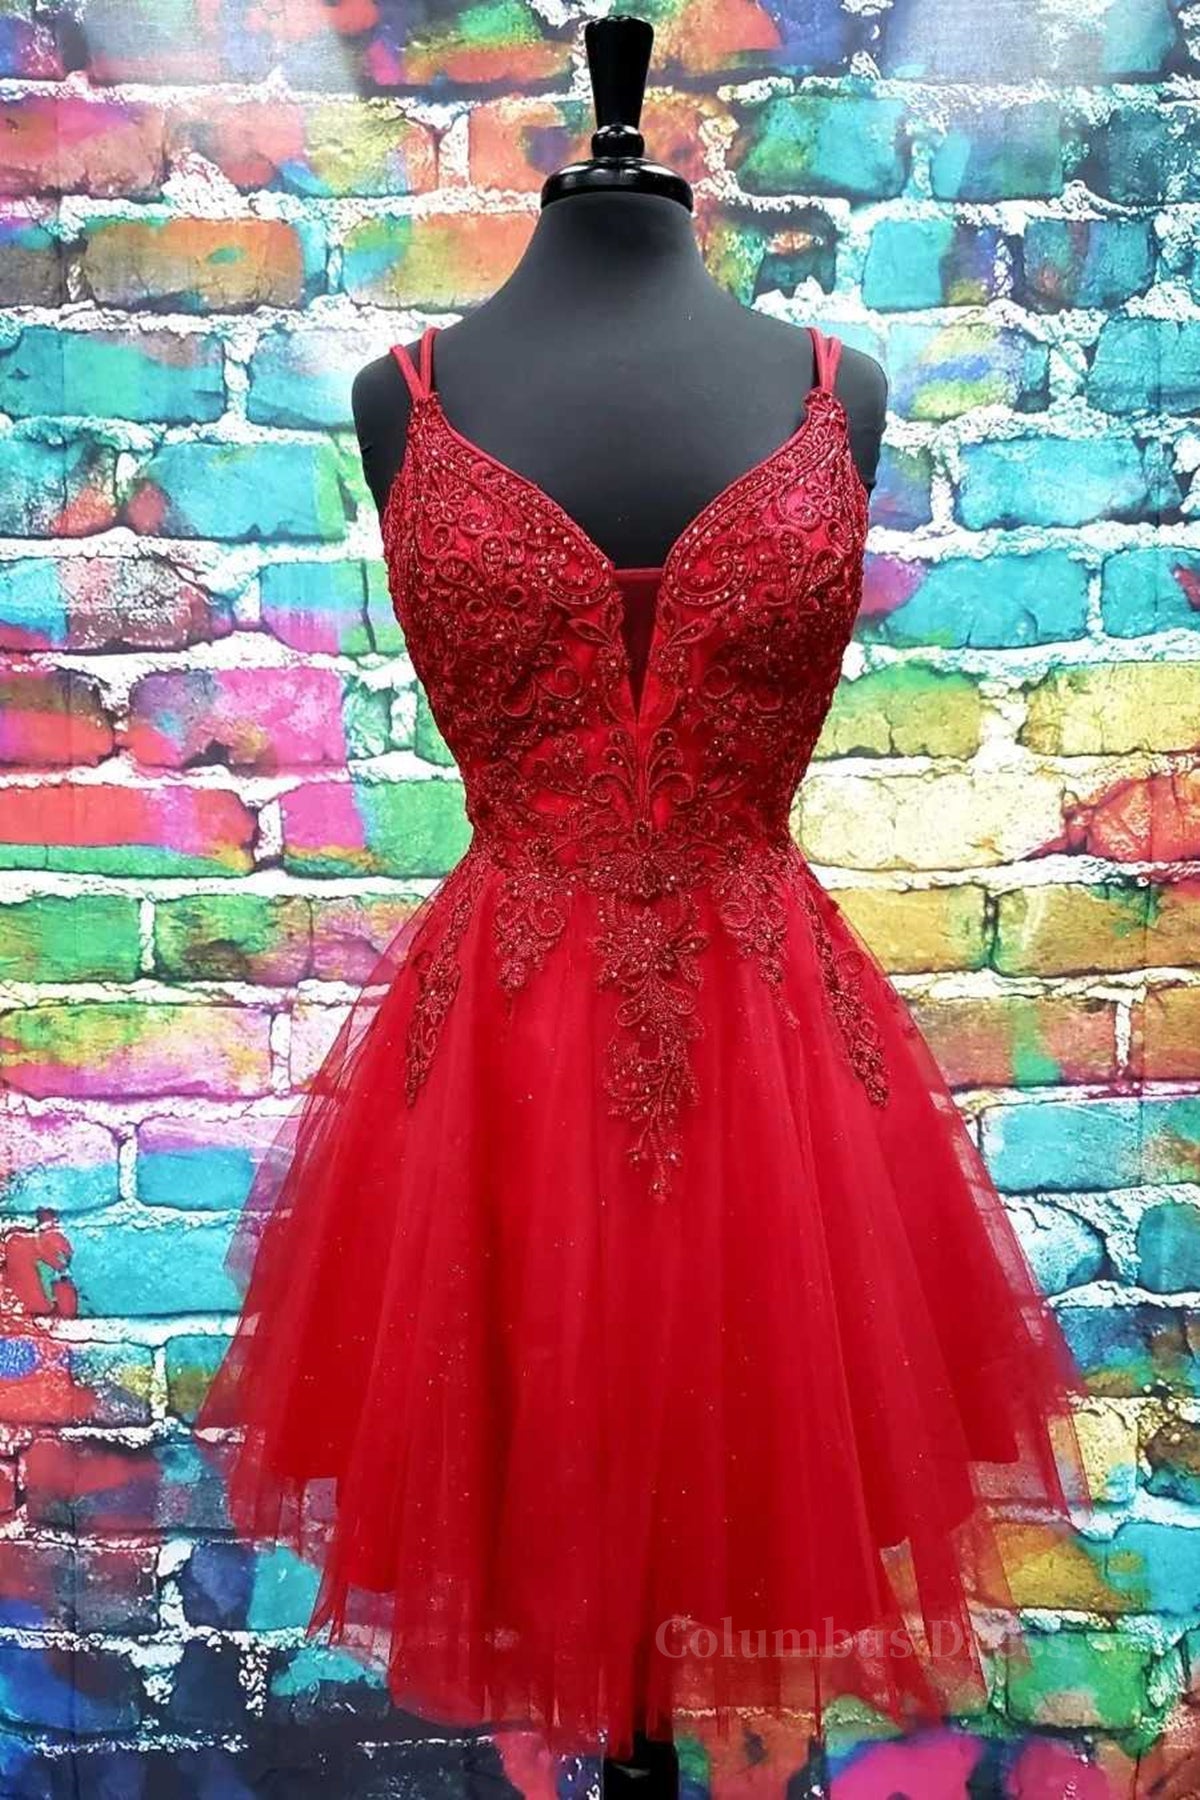 A Line V Neck Short Dark Red Lace Corset Prom Dresses, Short Dark Red Lace Corset Formal Corset Homecoming Dresses outfit, Homecoming Dressed Short